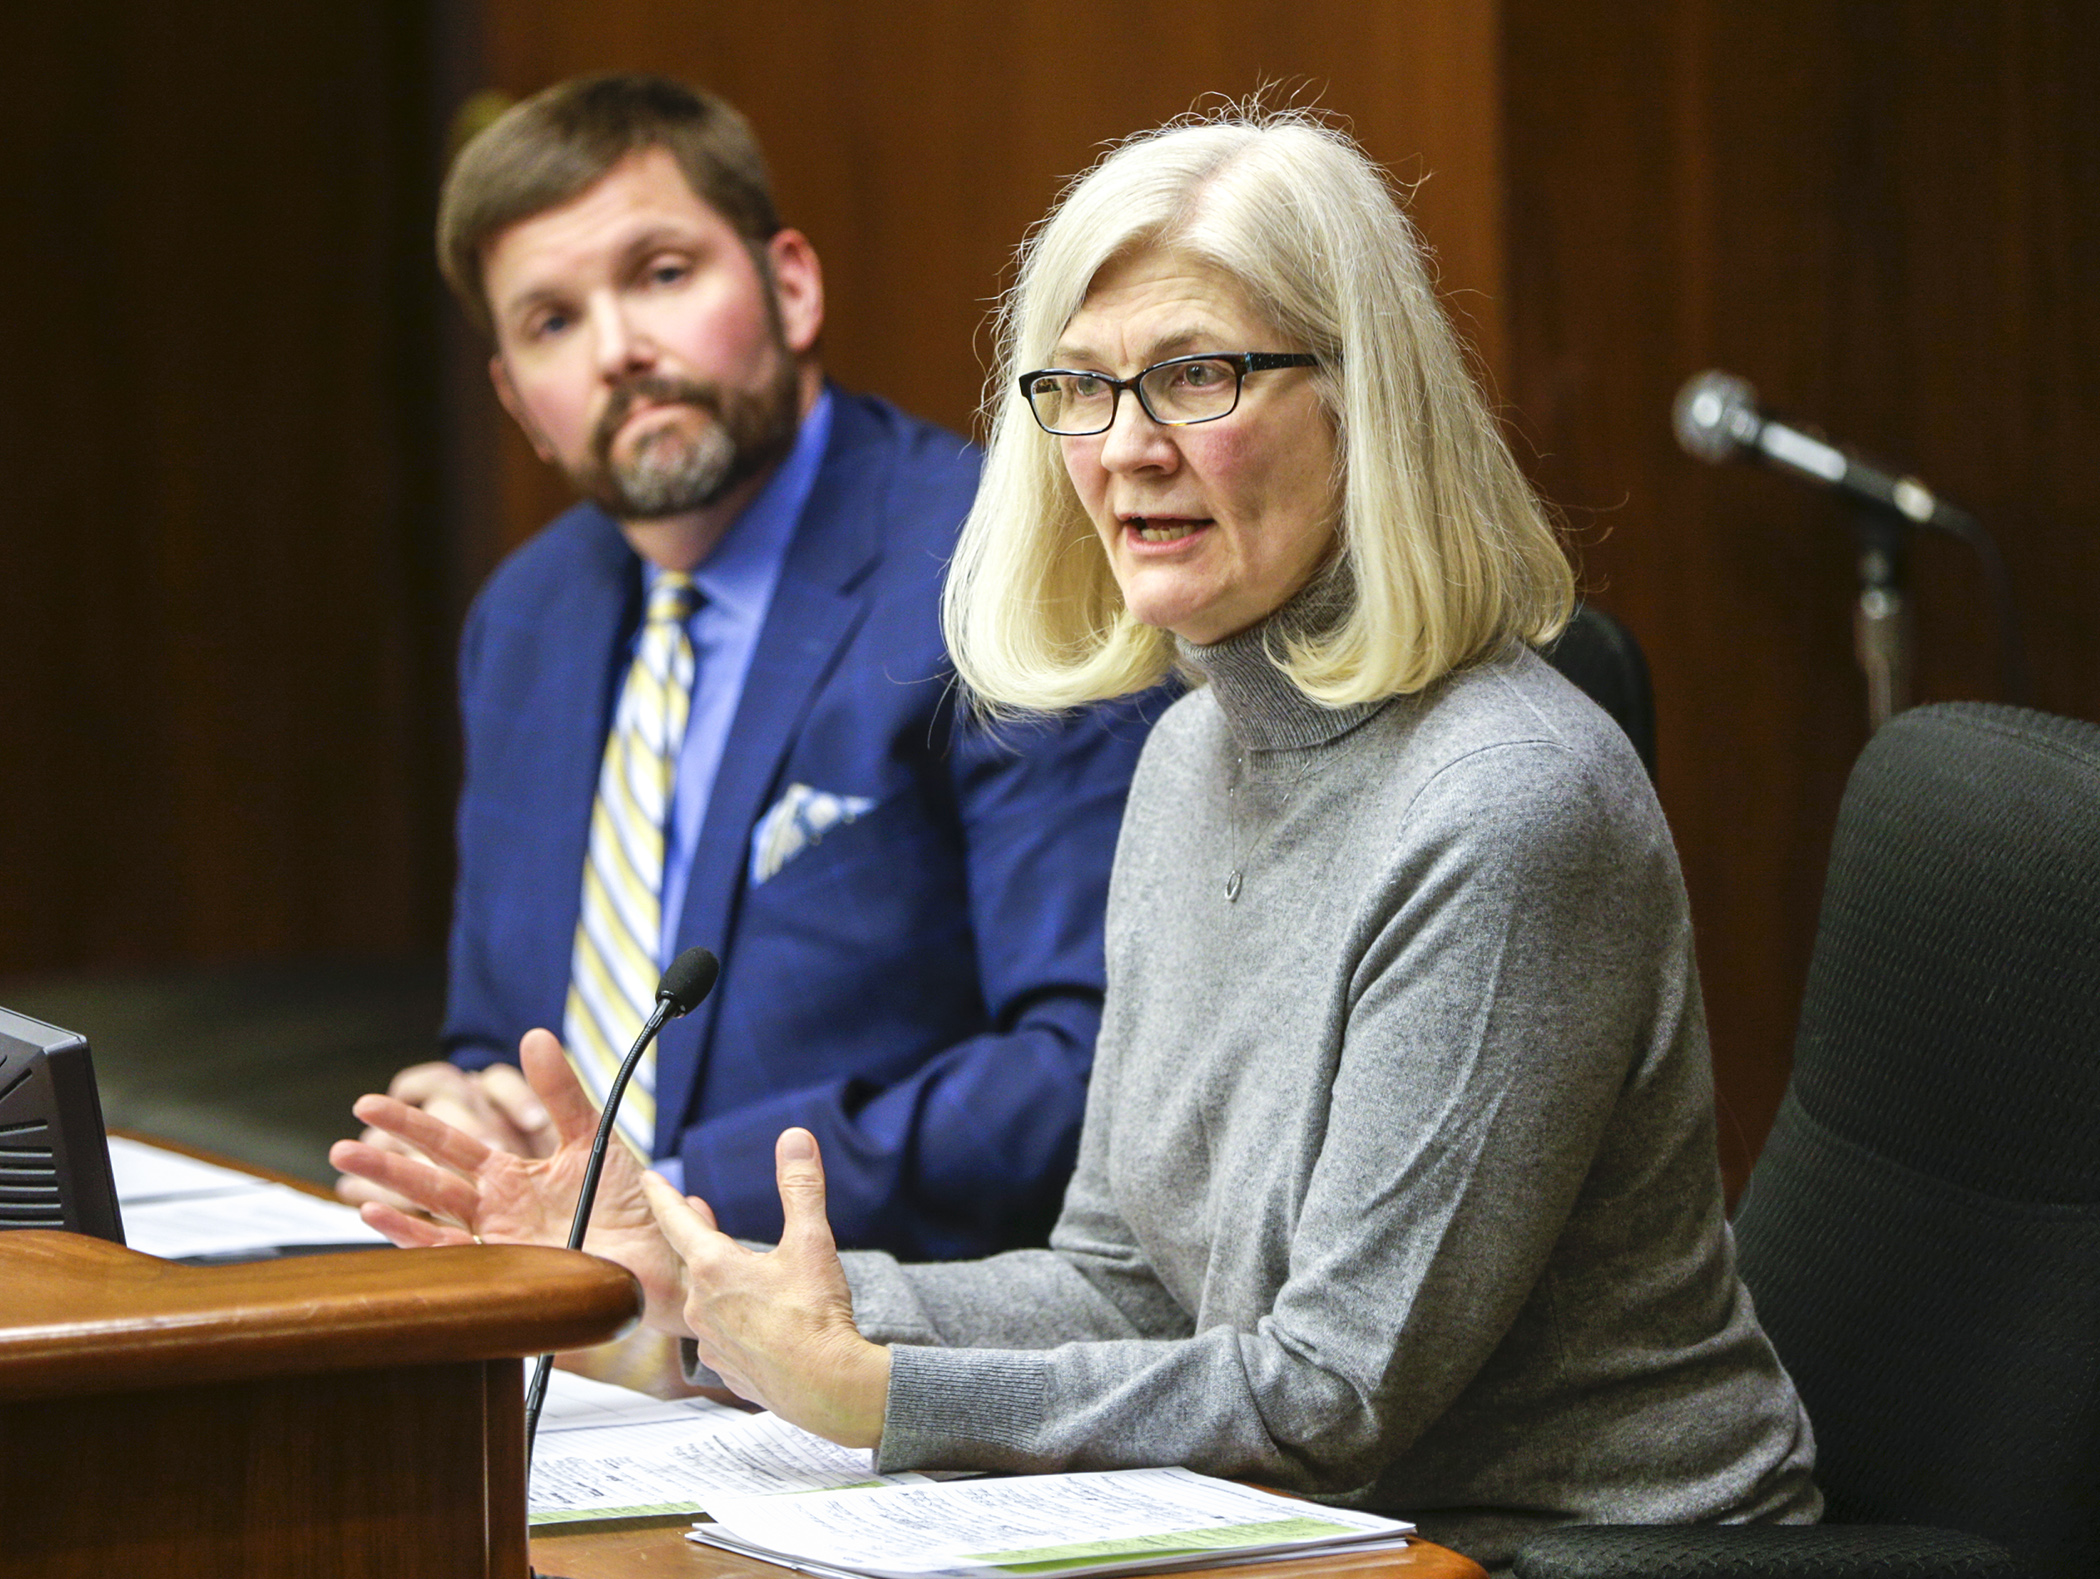 Lois Josefson, vice chair of the Regent Candidate Advisory Council, provides the House higher education committee with an overview of the University of Minnesota regent selection process. Seated with her is Dan Wolter, also a council vice chair. Photo by Paul Battaglia